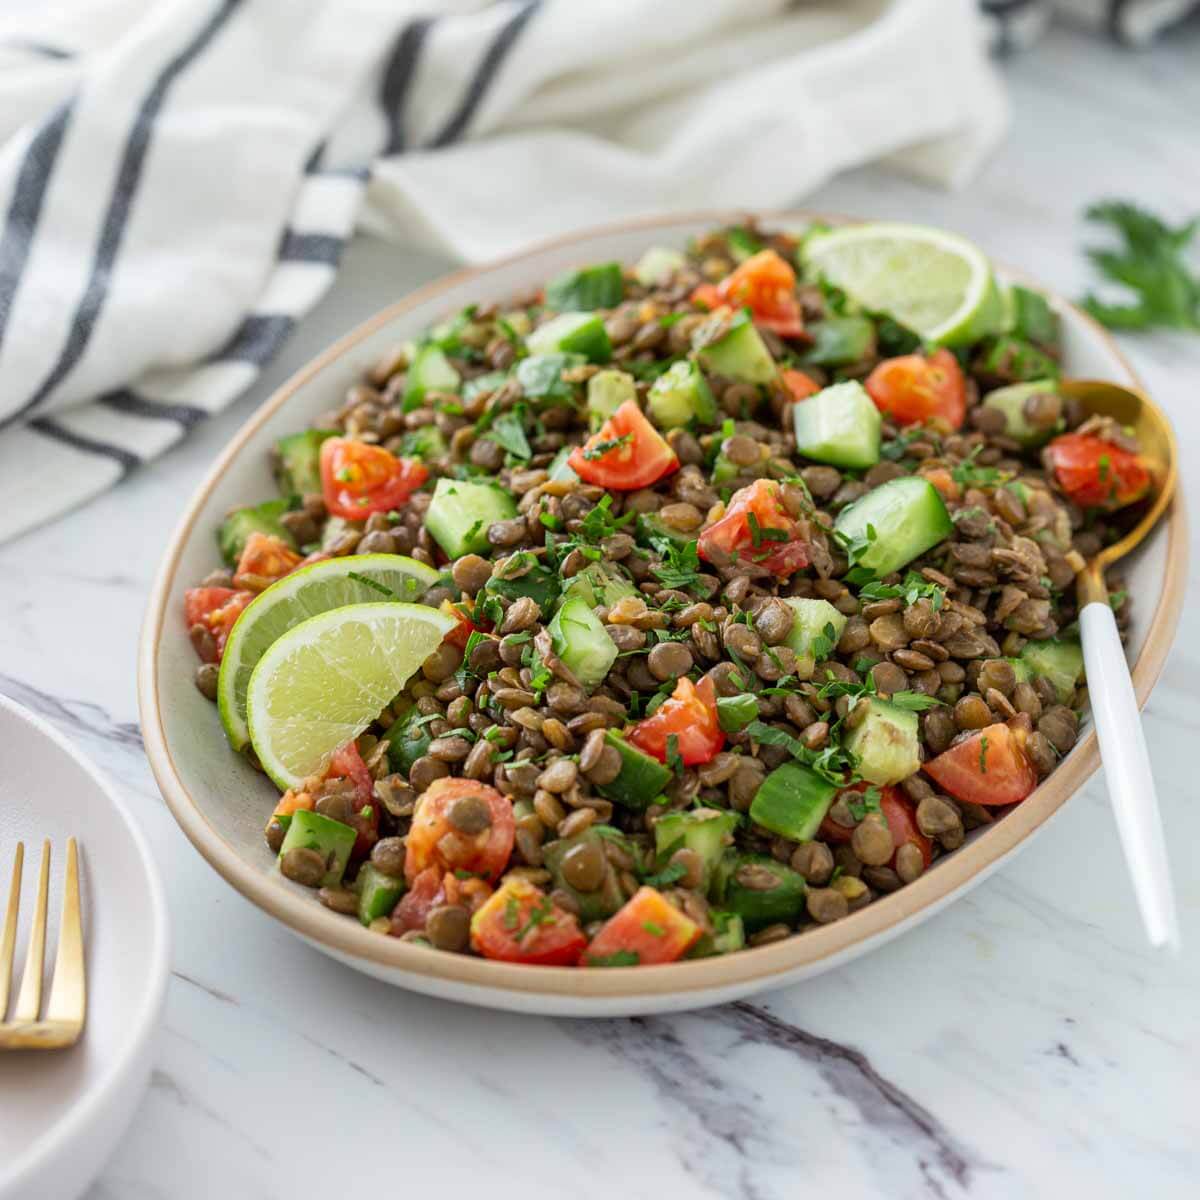 Prepared Italian lentil salad in a serving dish with a serving spoon.